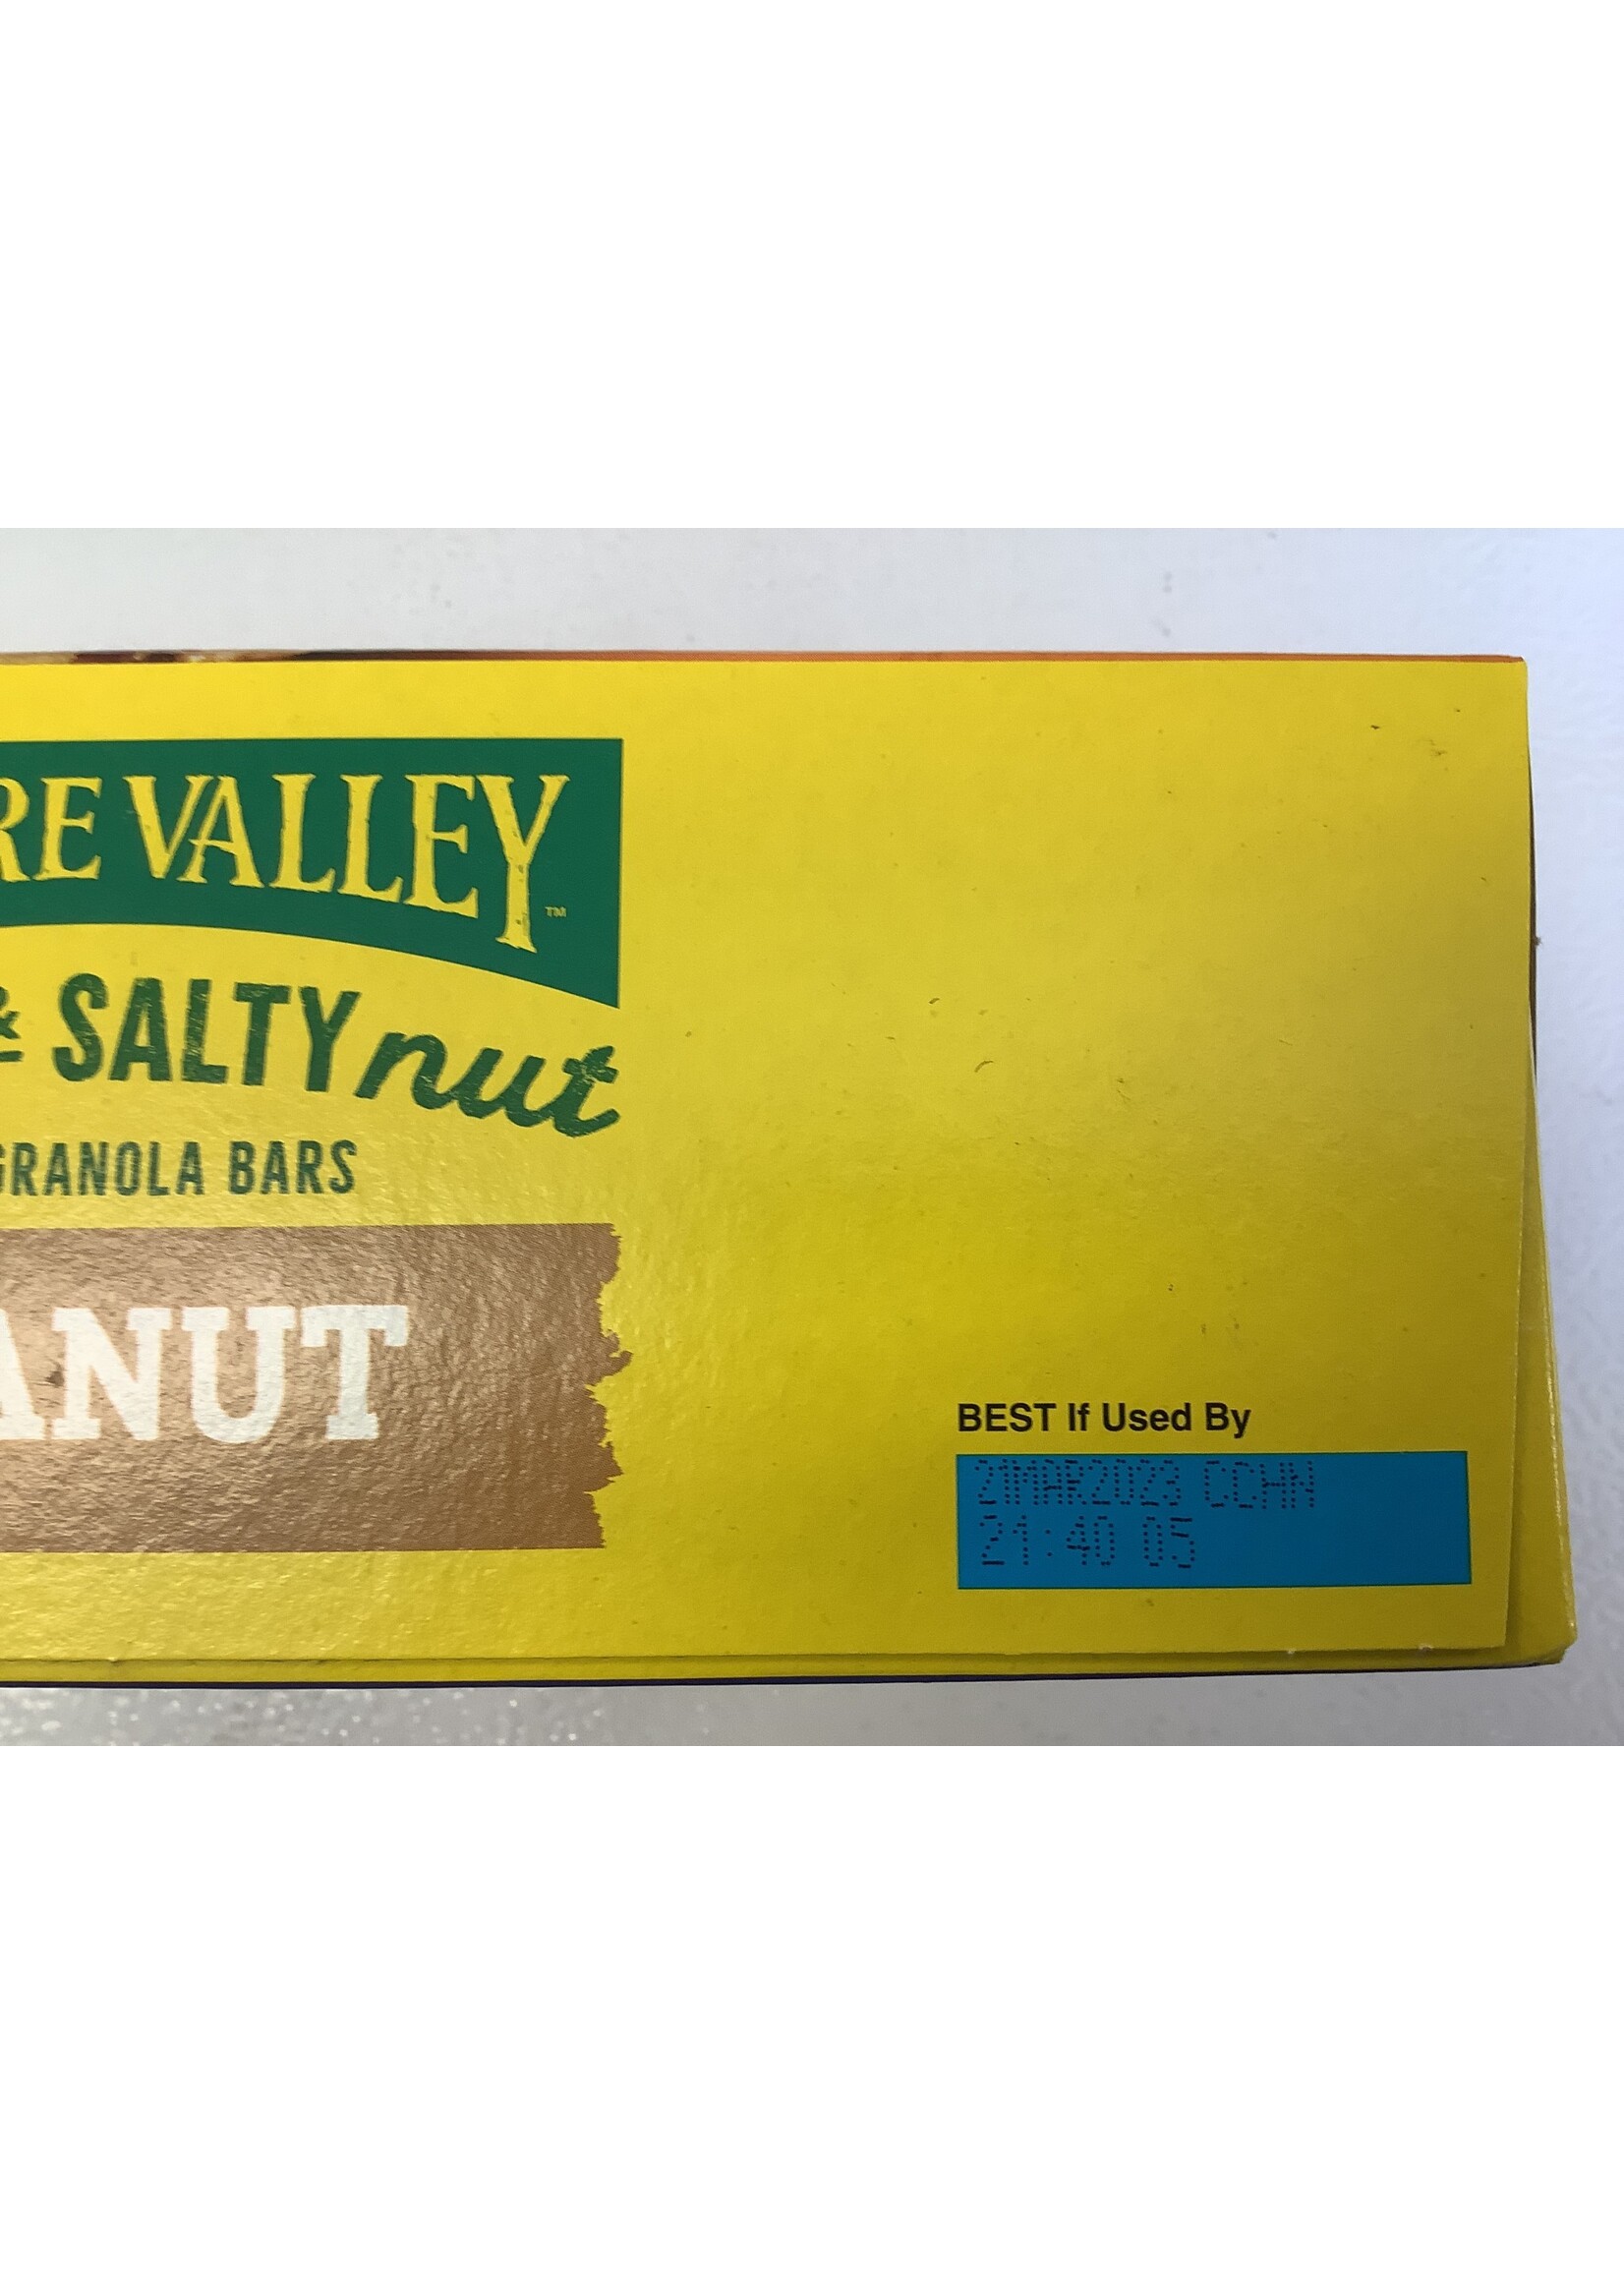 18ct Nature Valley Sweet & Salty Nut Chewy Granola Bars *3/23